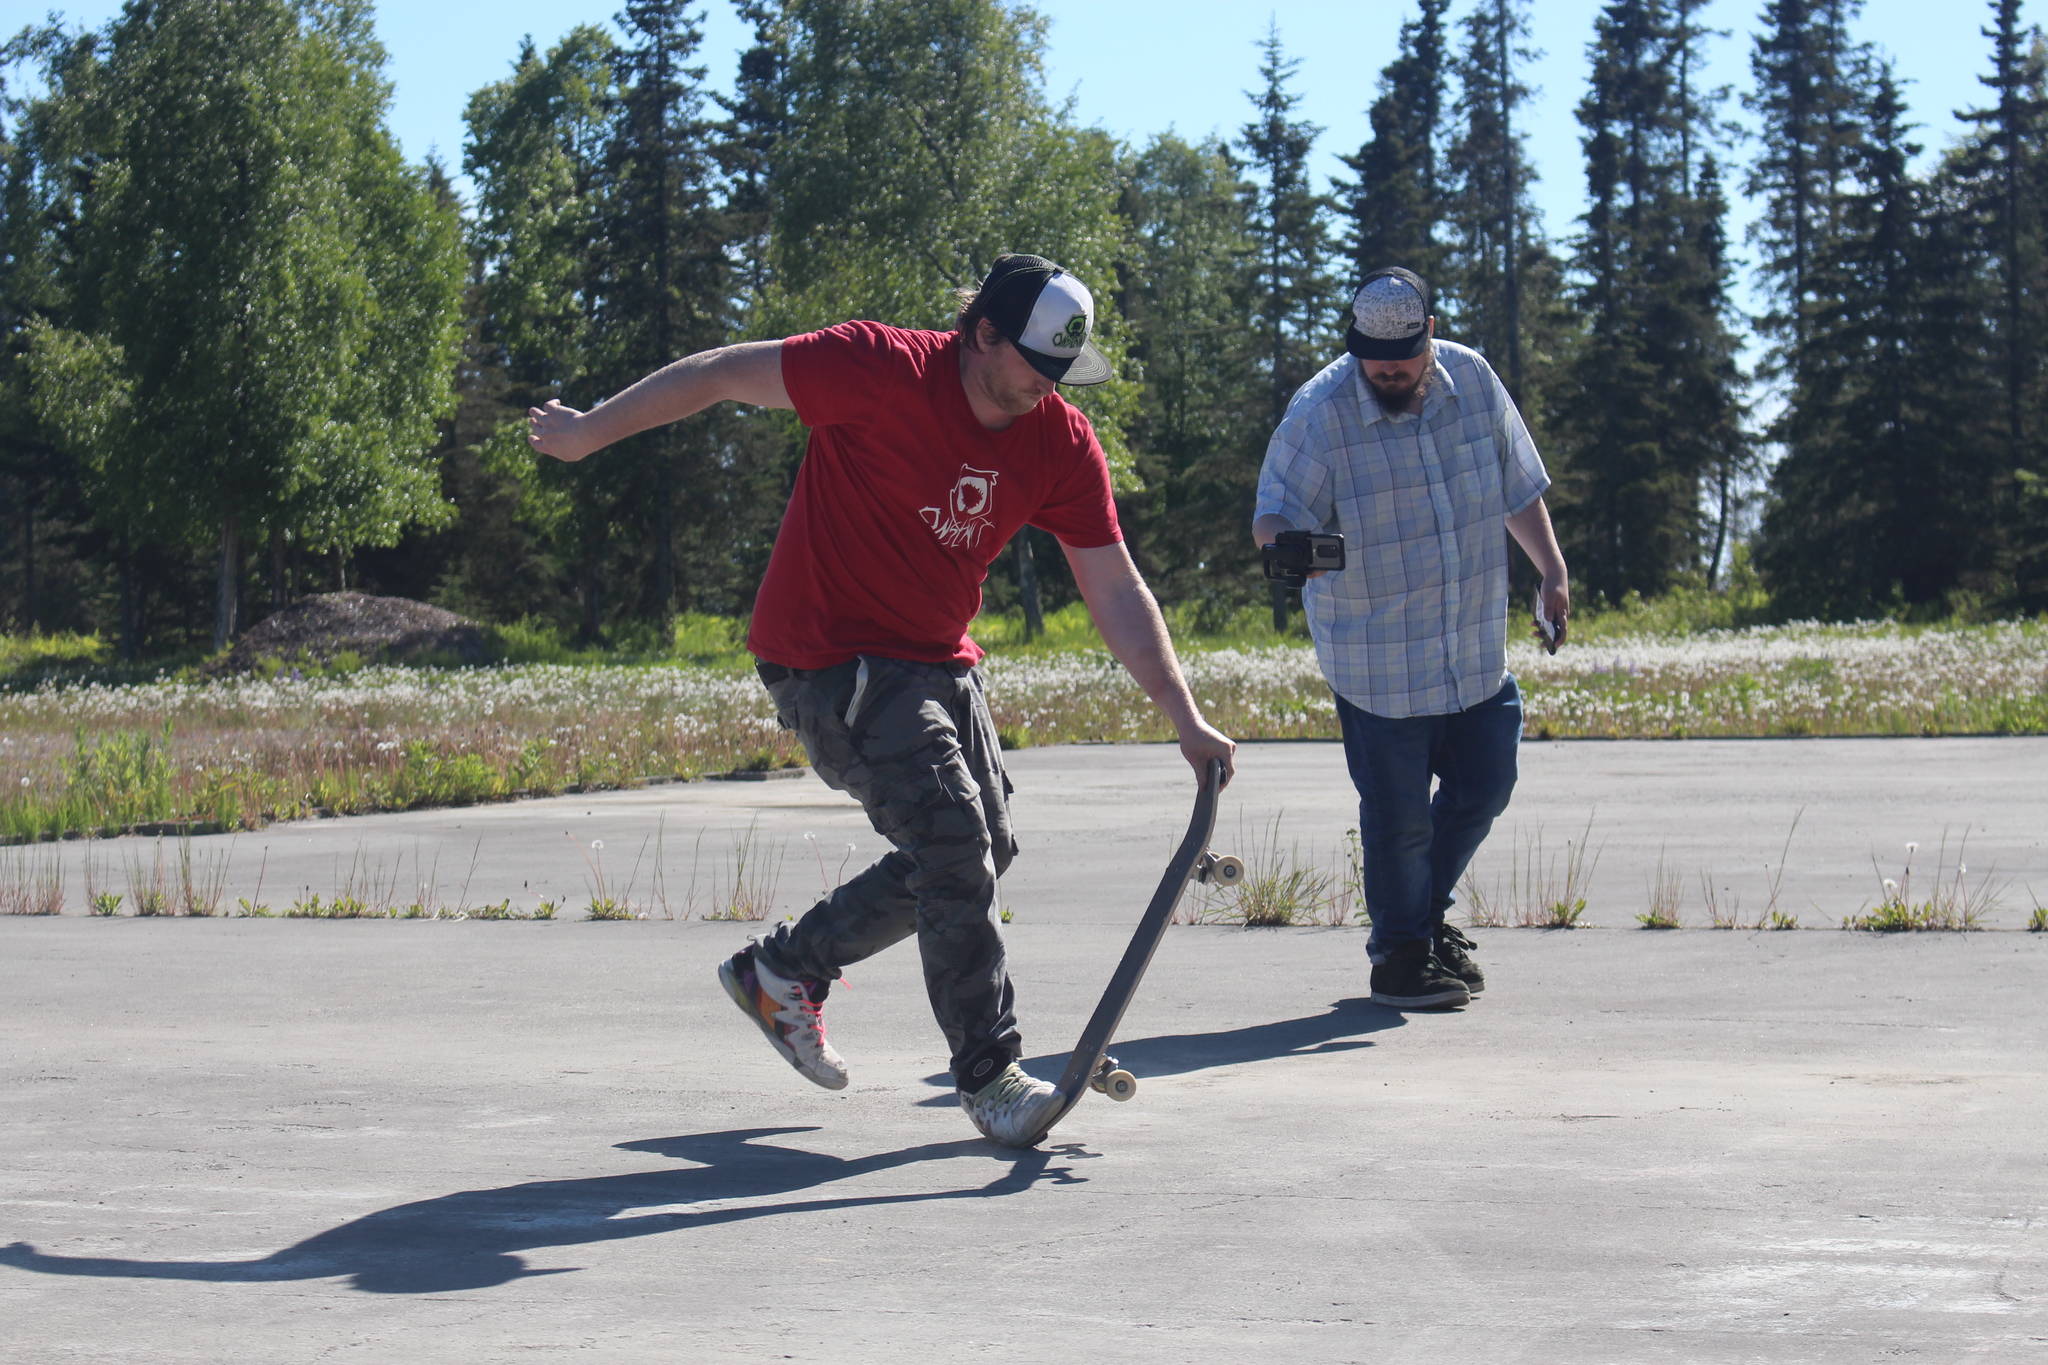 Nikiski skateboarder Vaughn Johnson records his run for the 2020 World Freestyle Roundup with the help of his friend and videographer Noah “Party Bear” Windhom in Nikiski, Alaska on June 14, 2020. (Photo by Brian Mazurek/Peninsula Clarion)